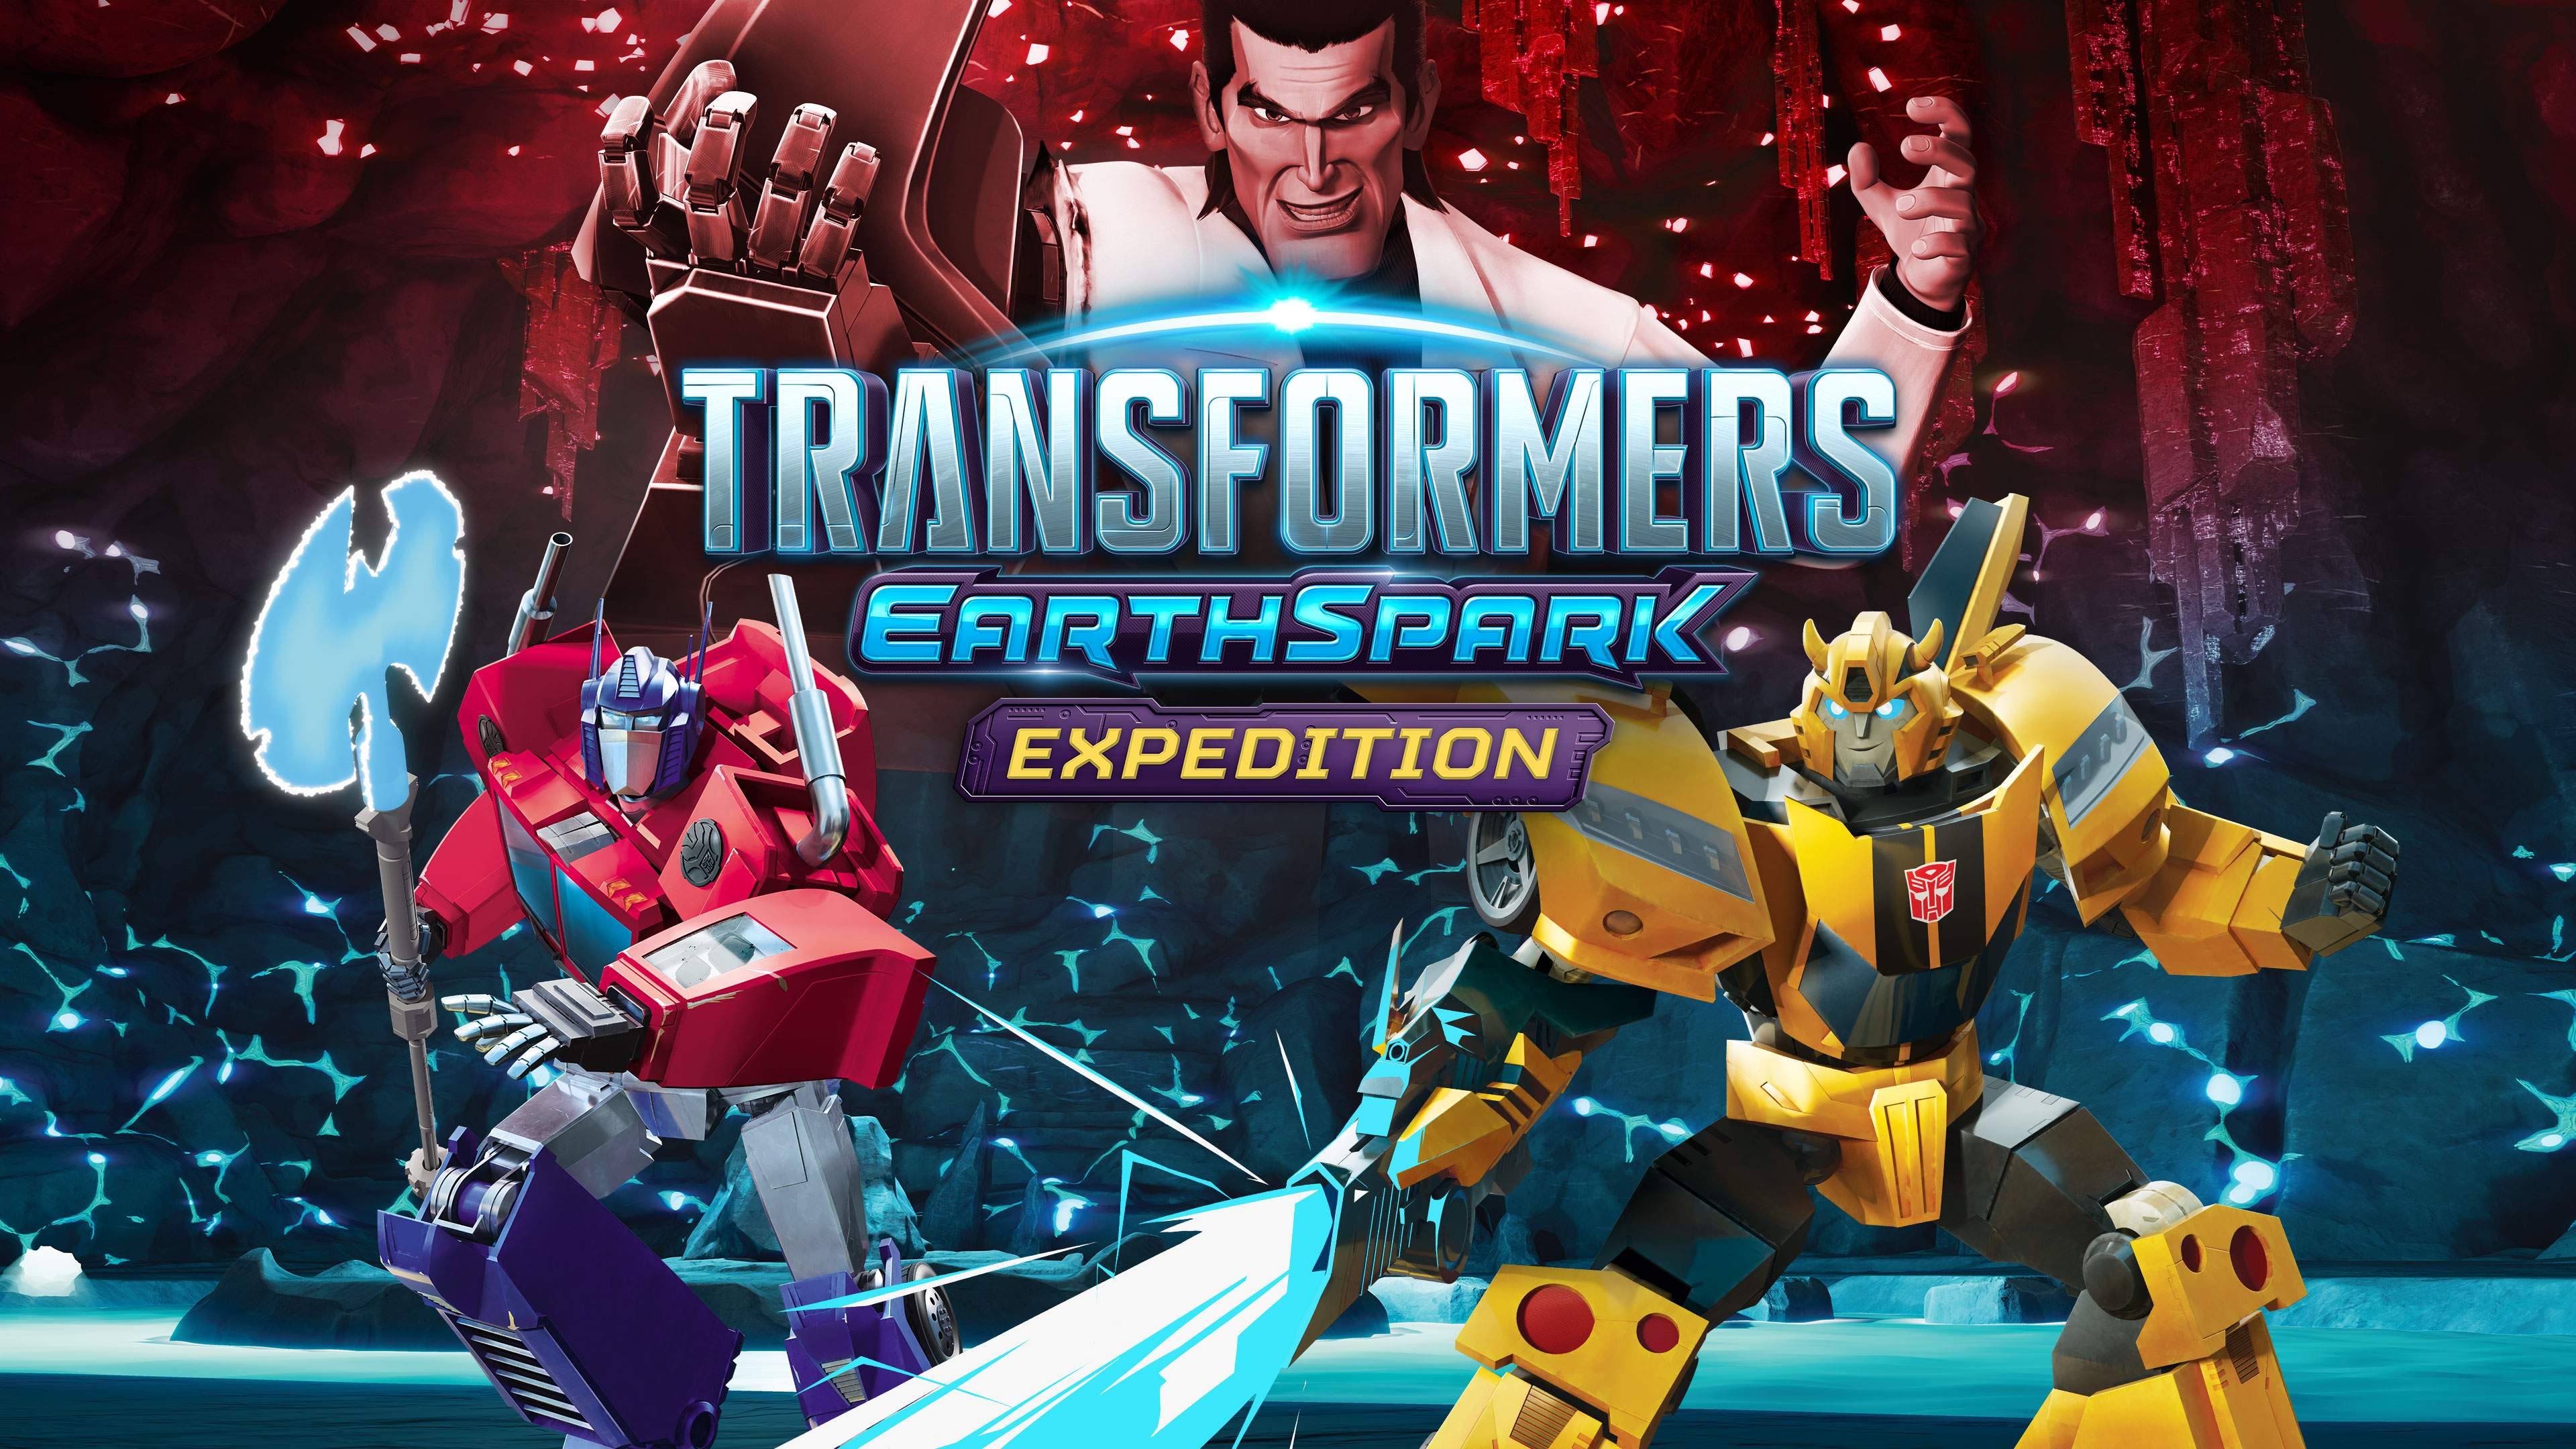 Transformers Earthspark Expedition Recensione